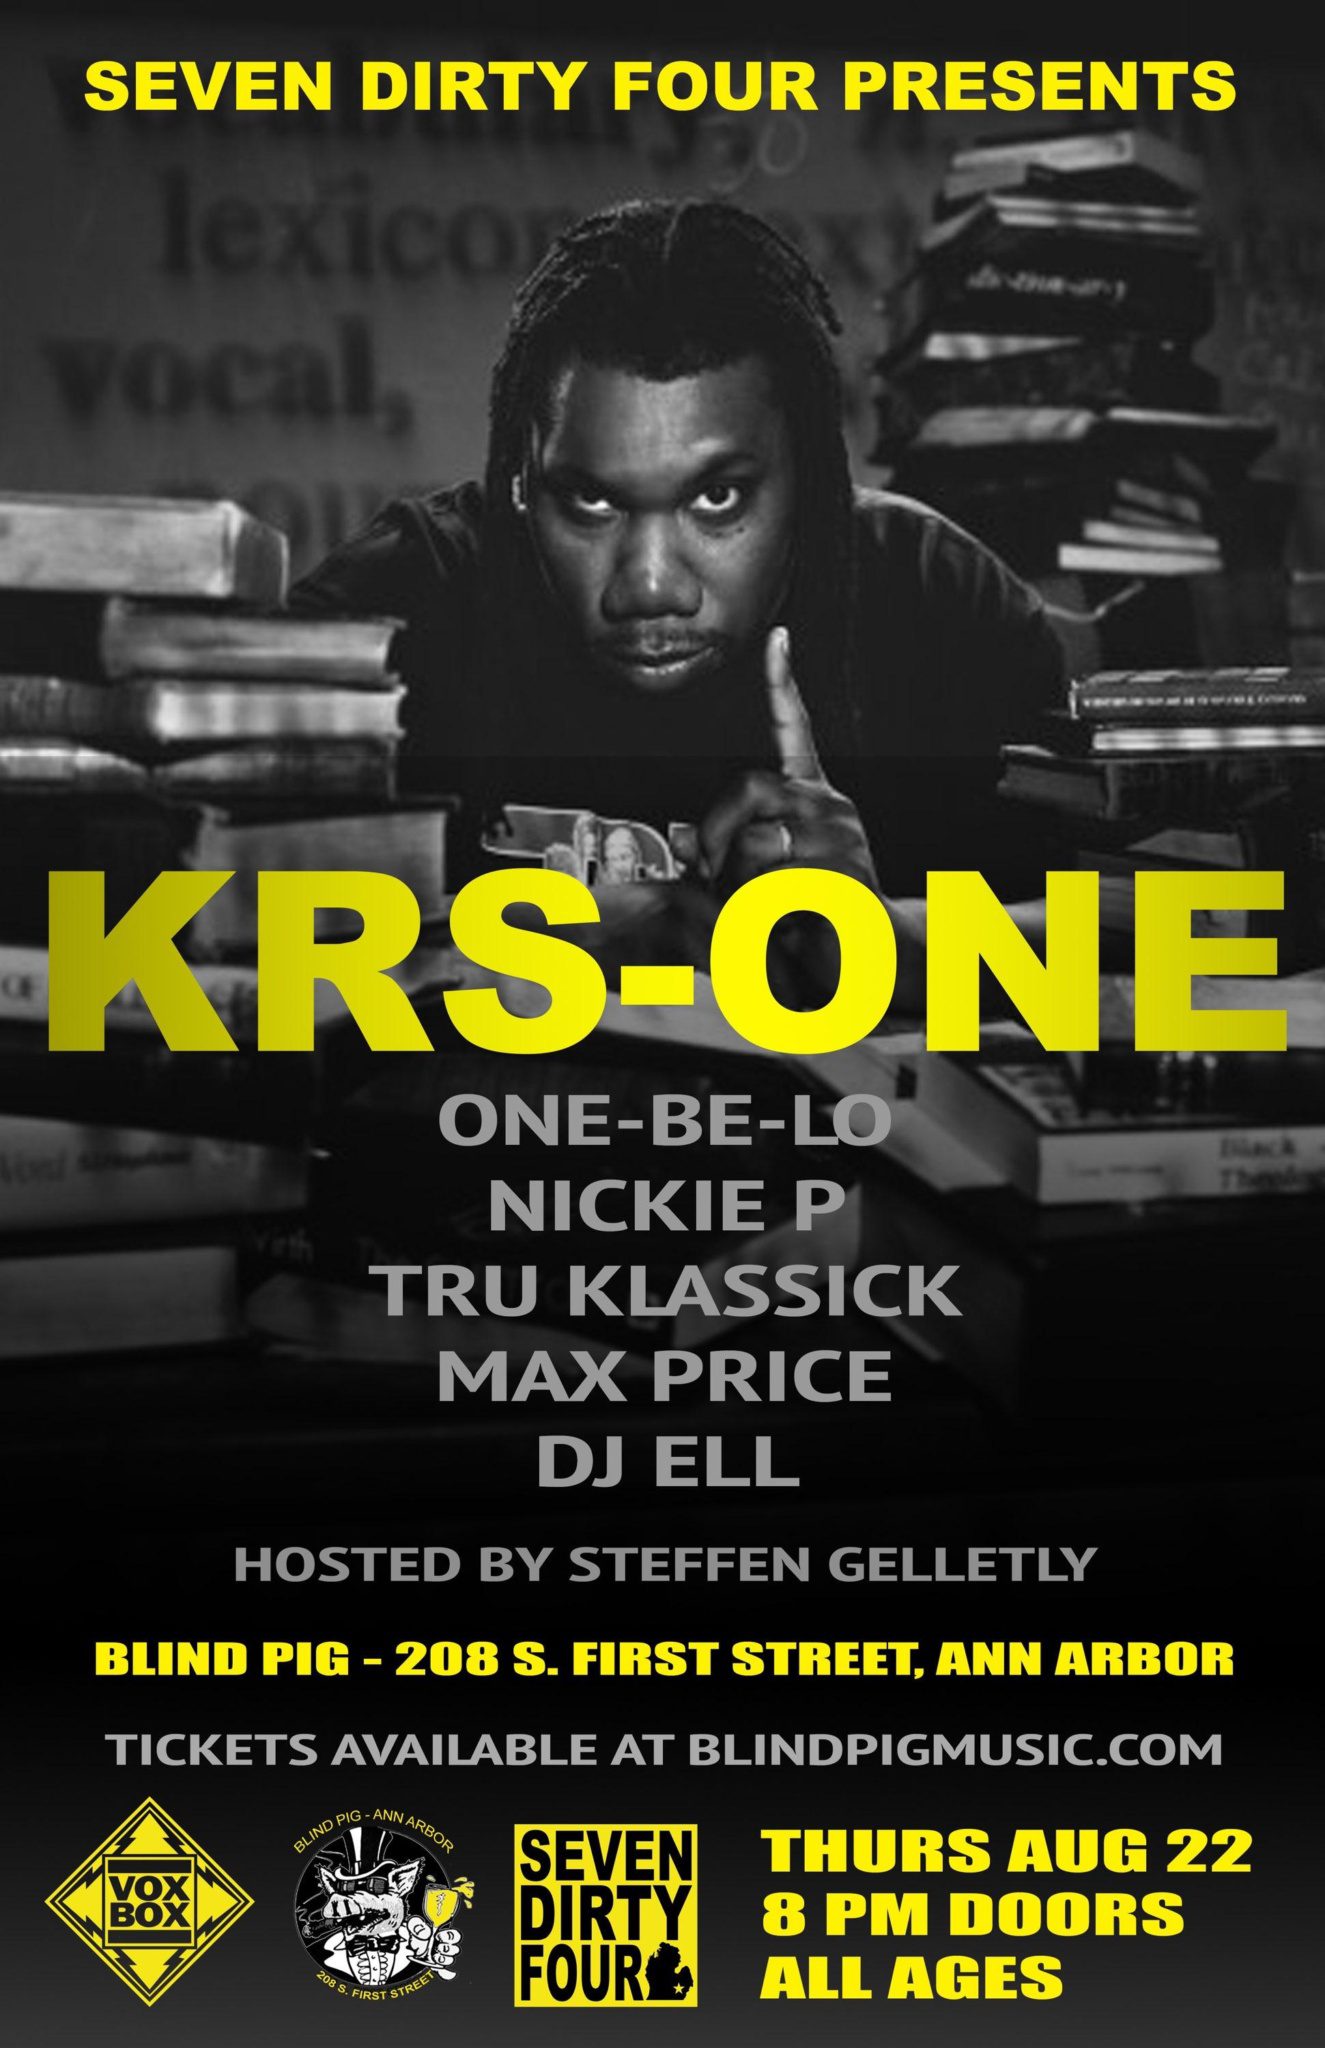 KRS-ONE Blind Pig 8.22.19 Flyer with Ell